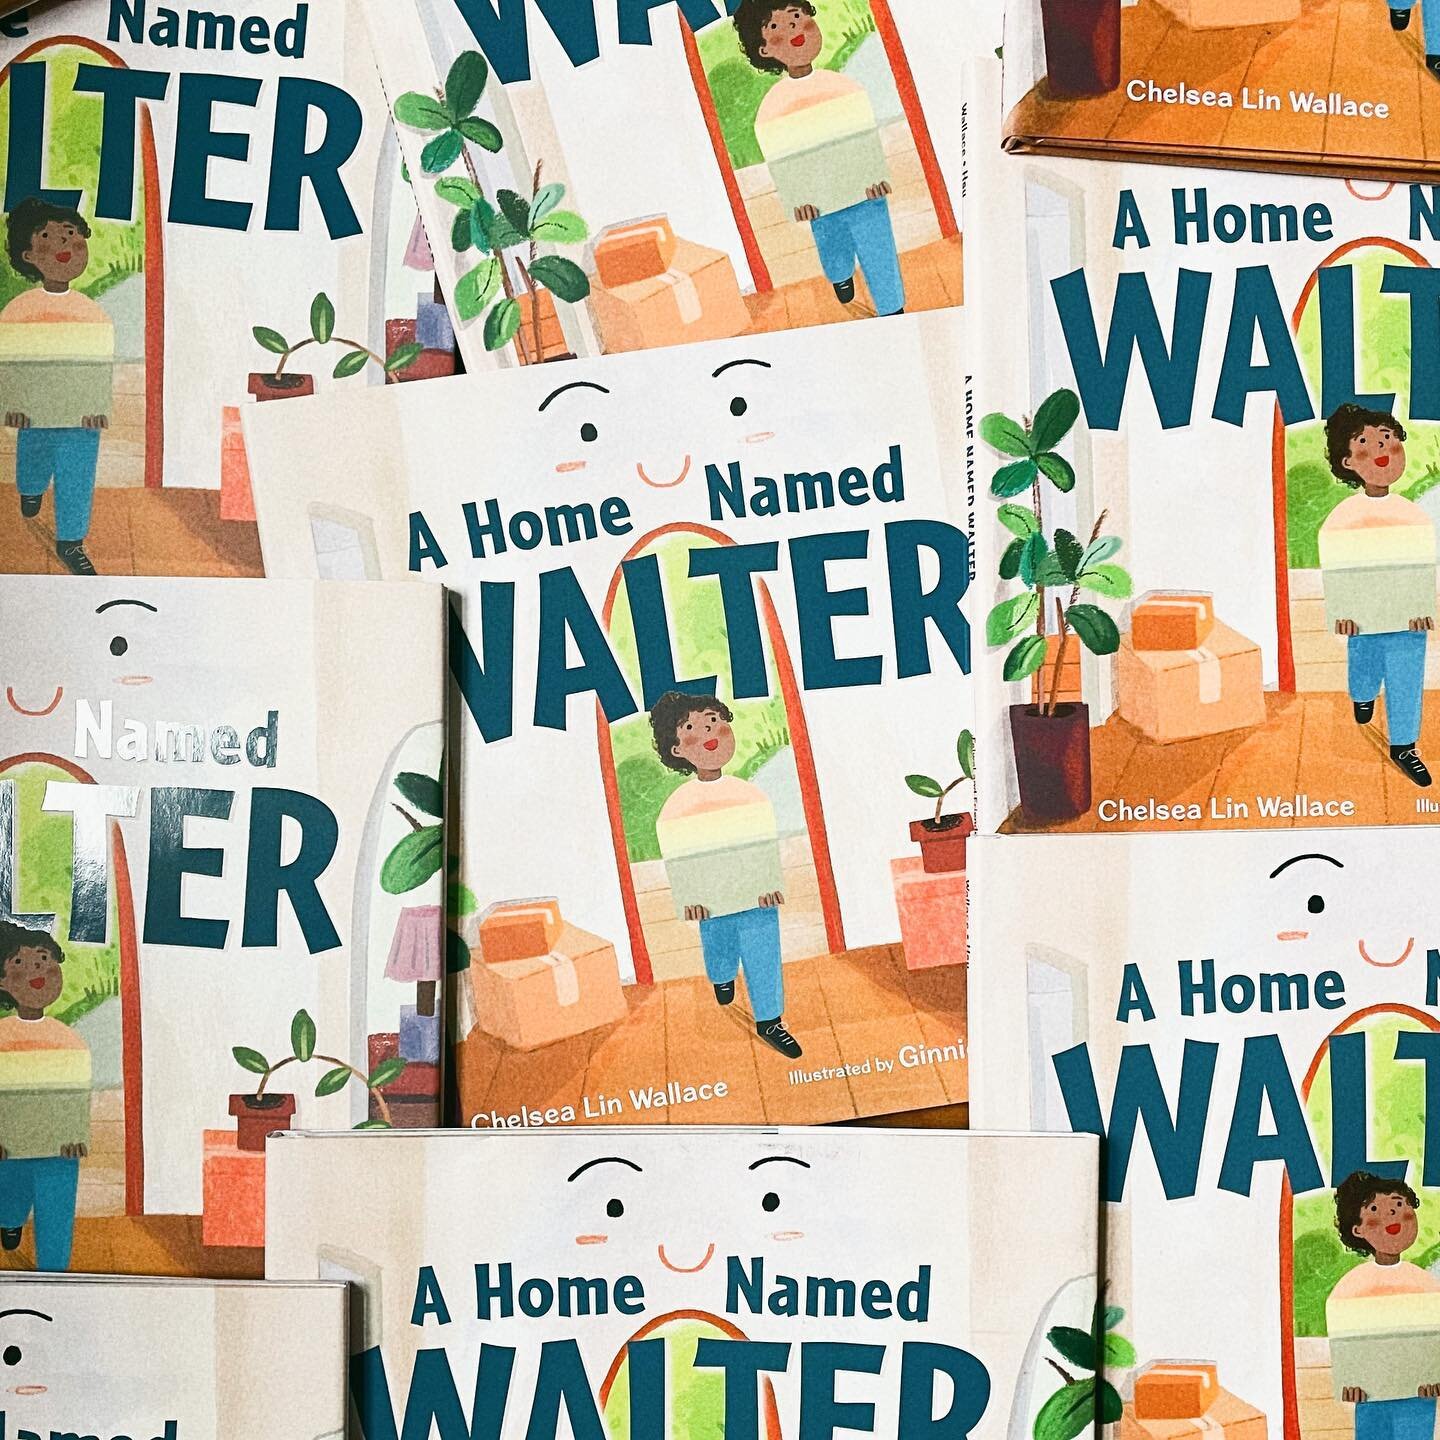 Oh hey, lovely humans.
4.19 is WALTER&rsquo;S BIRTHDAY. (Tomorrow)
And, I am doing a give away!

It&rsquo;s the first fiction picture book I illustrated, and I love it so much!
Thanks to the sweet and heartwarming story written by The sweetest human,